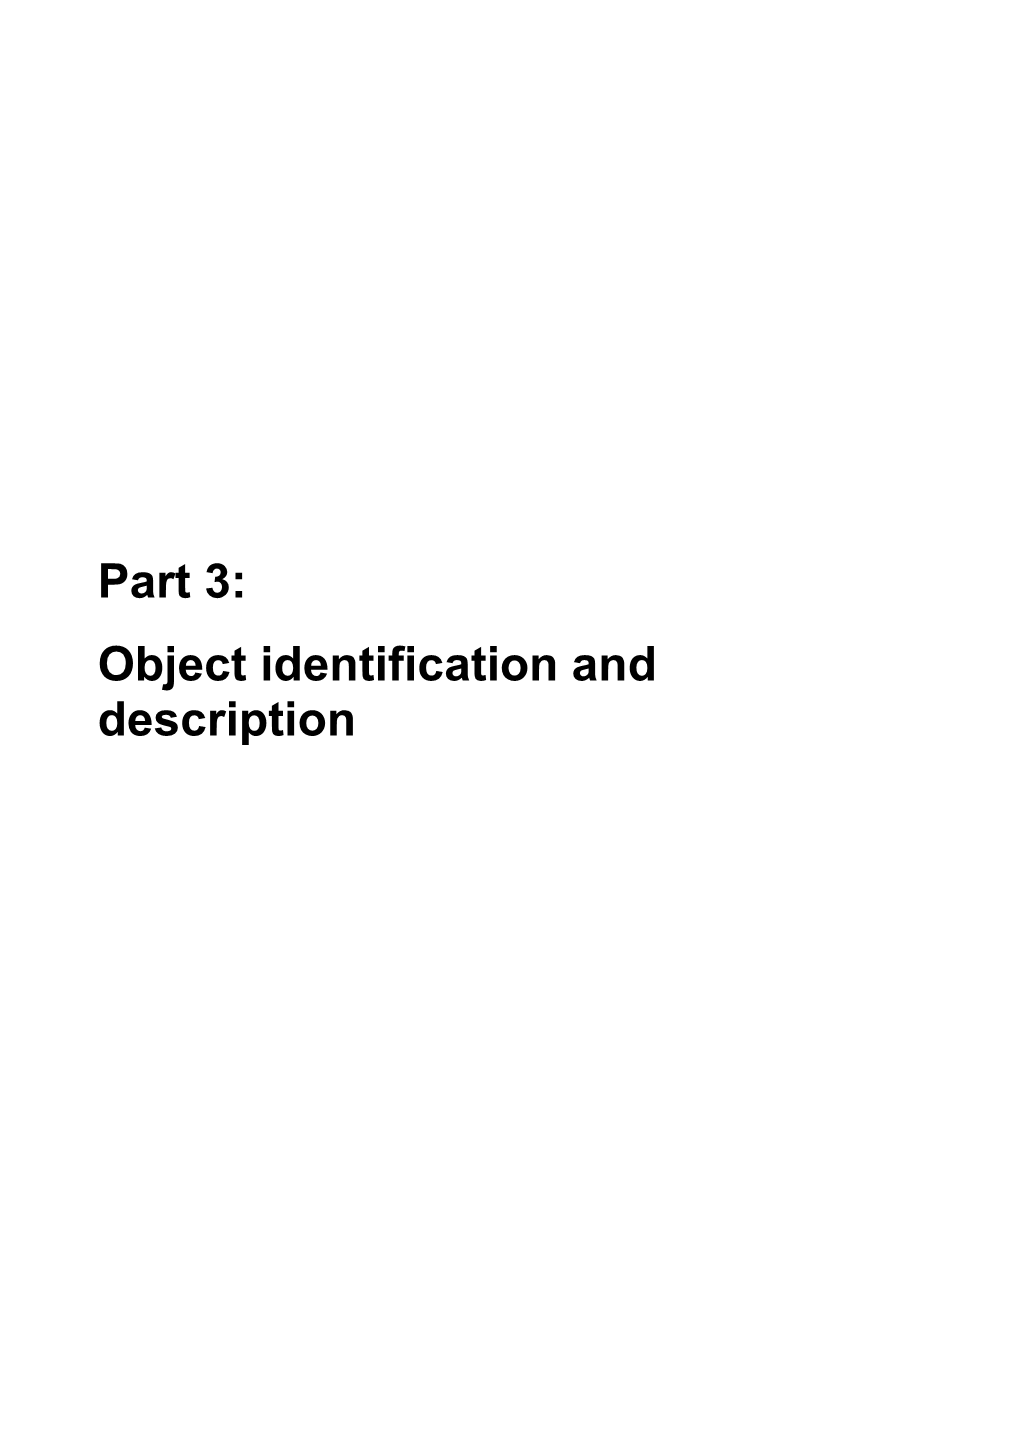 Object Identification and Description